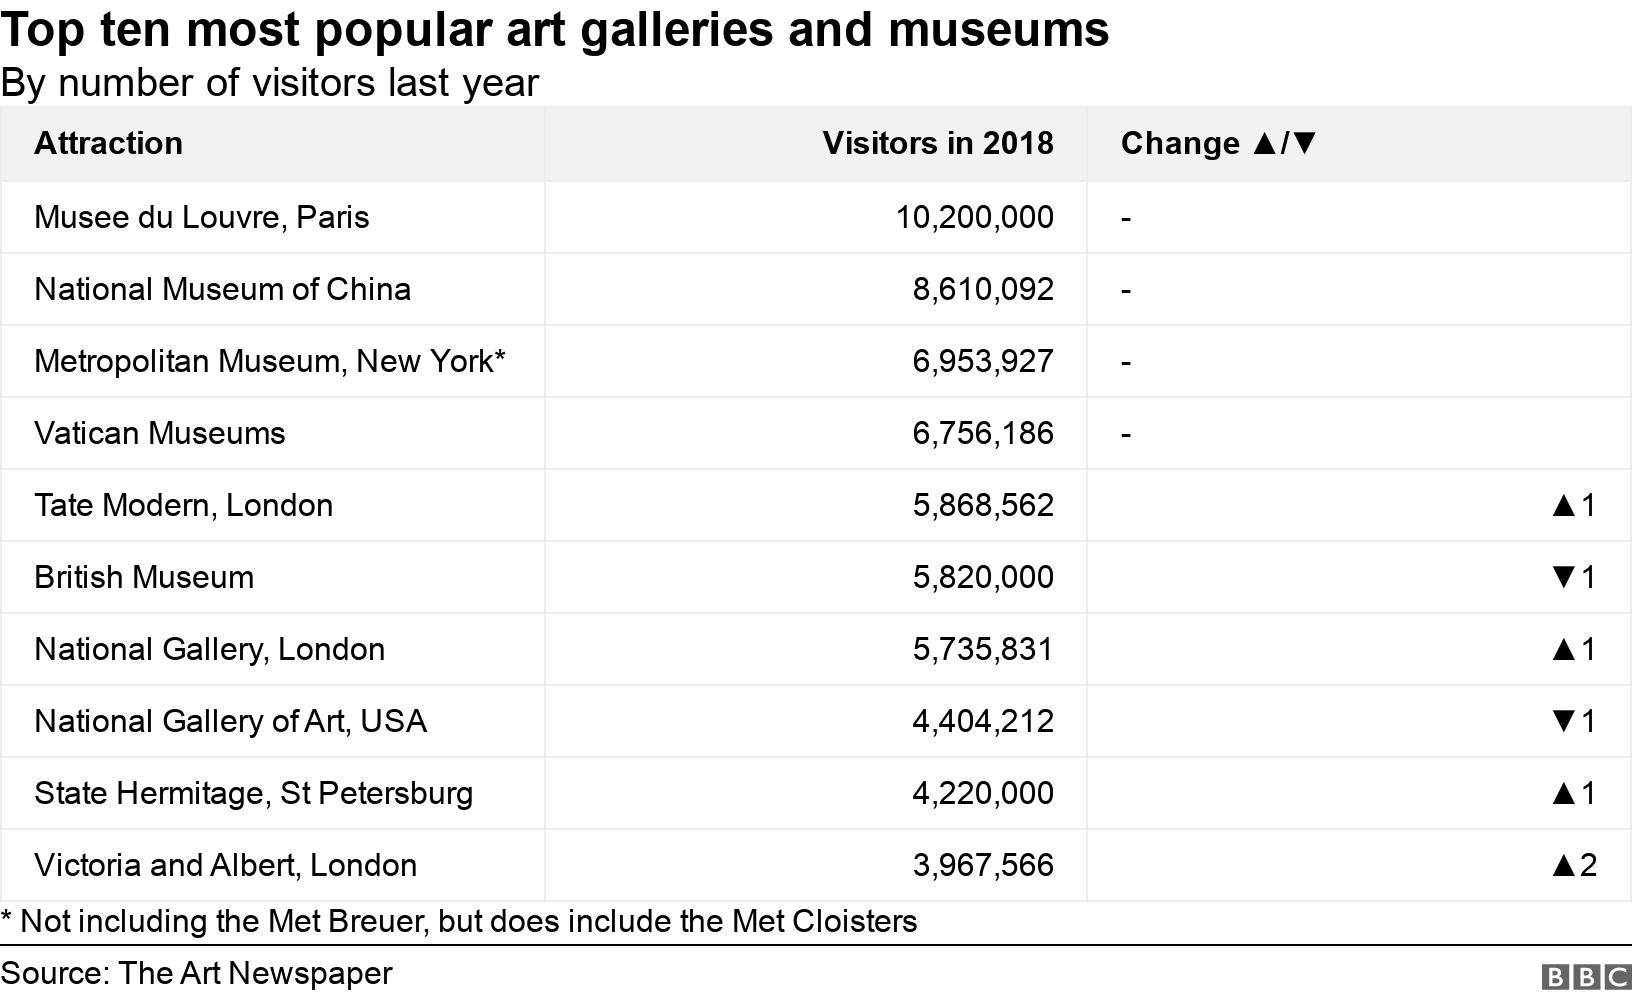 Top ten most popular art galleries and museums. By number of visitors last year.  * Not including the Met Breuer, but does include the Met Cloisters.